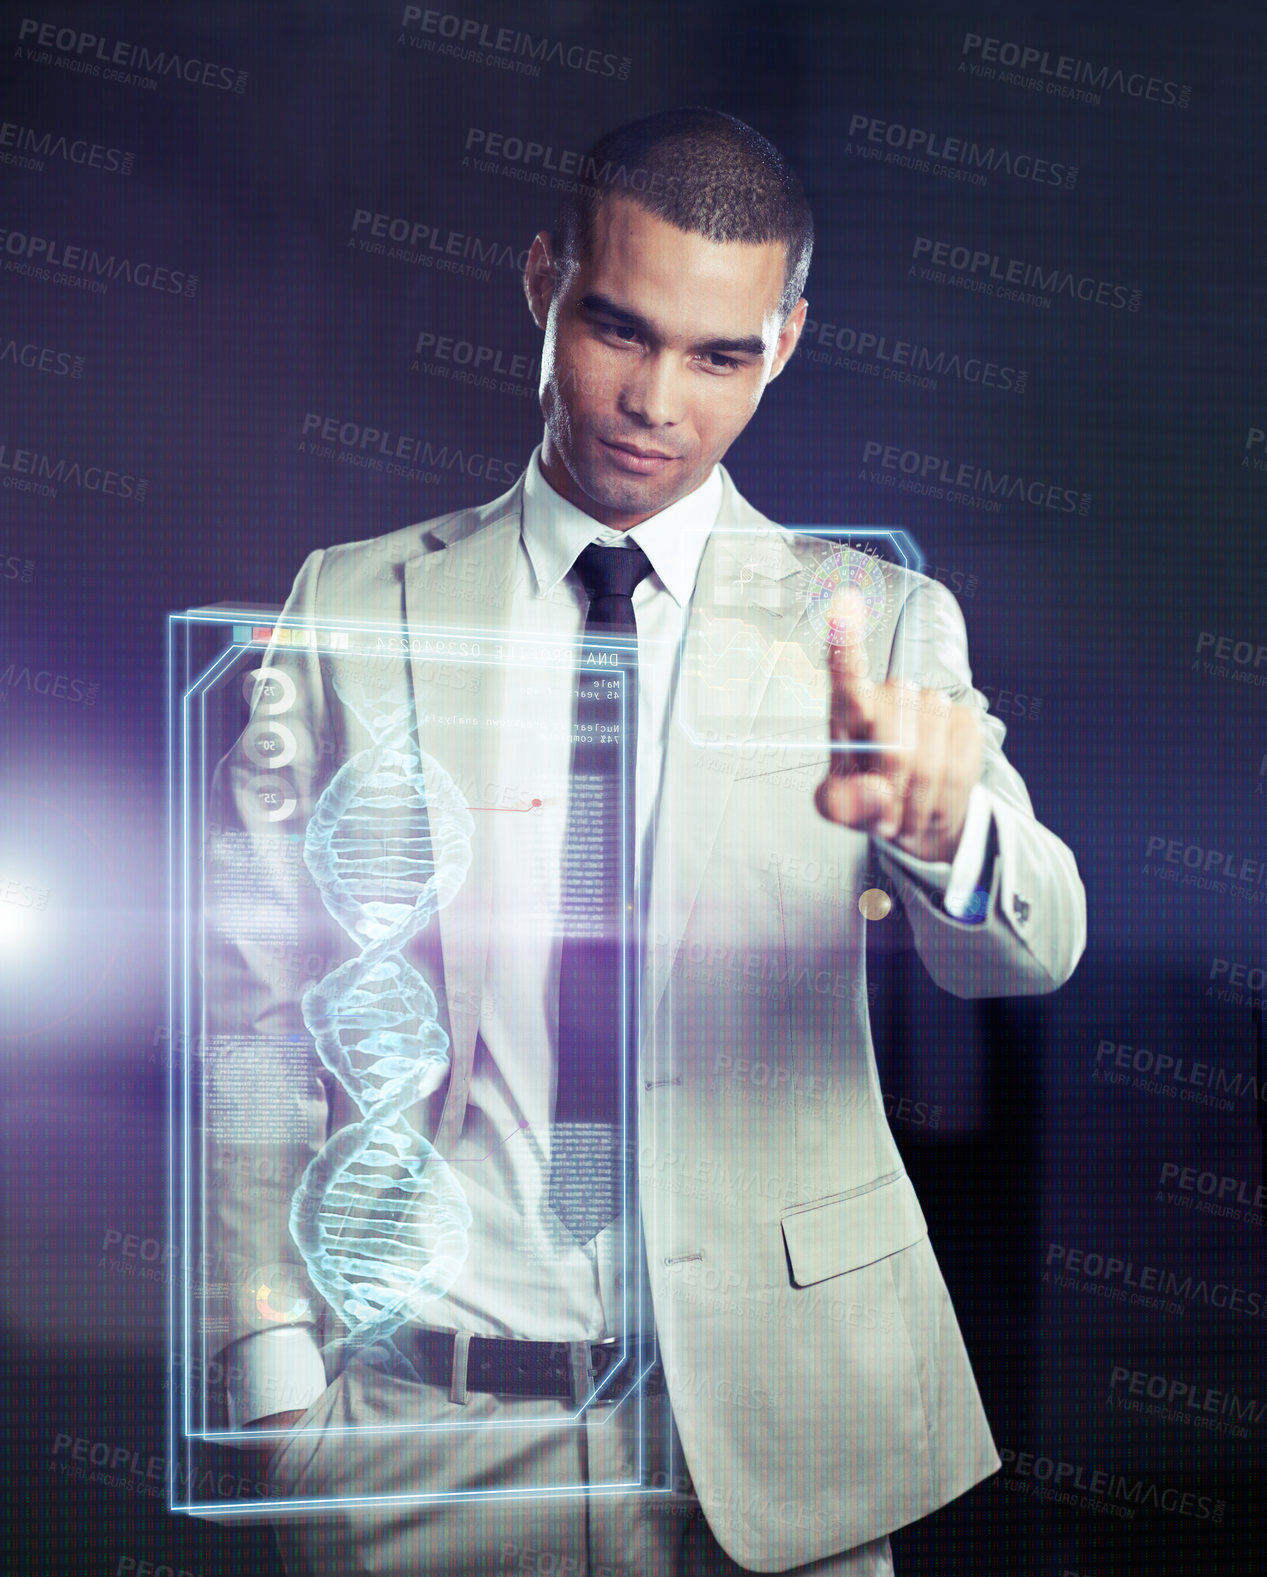 Buy stock photo A businessman using futuristic touch technology for scientific research. All screen content is designed by us and not copyrighted by others, and upon purchase a user license is granted to the purchaser. A property release can be obtained if needed.